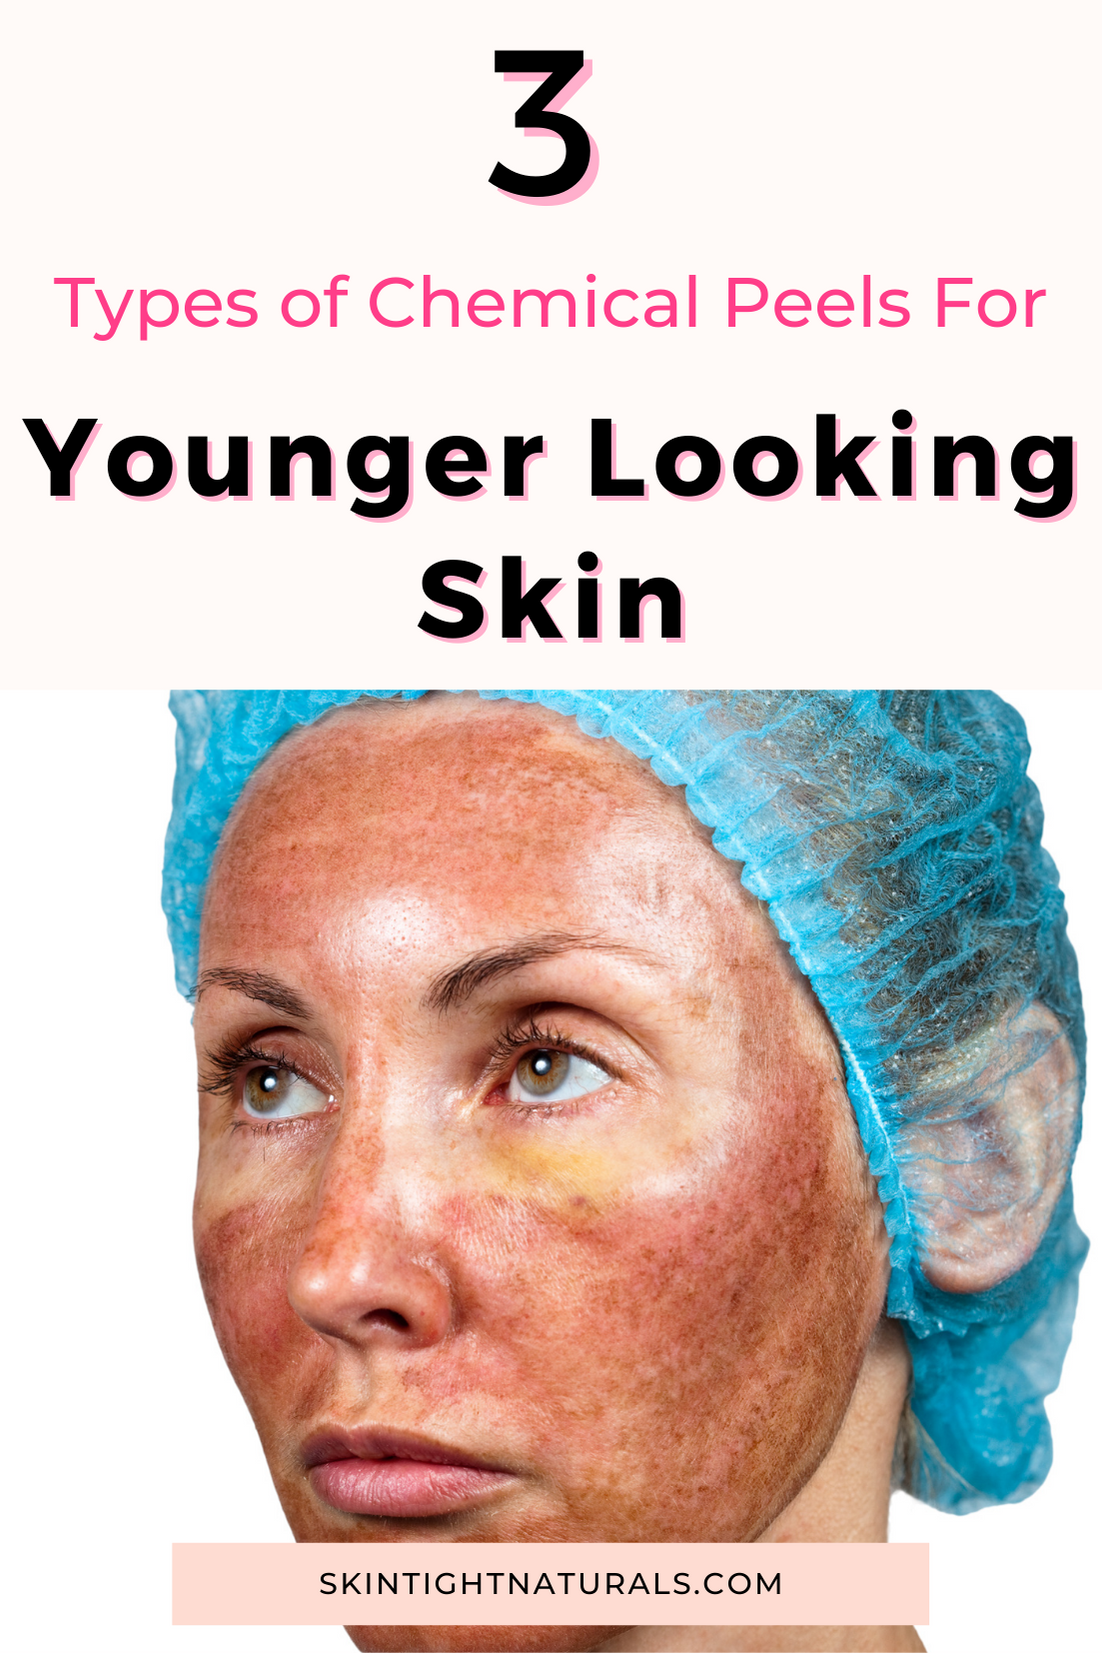 3 Types of Chemical Peels for Younger Looking Skin